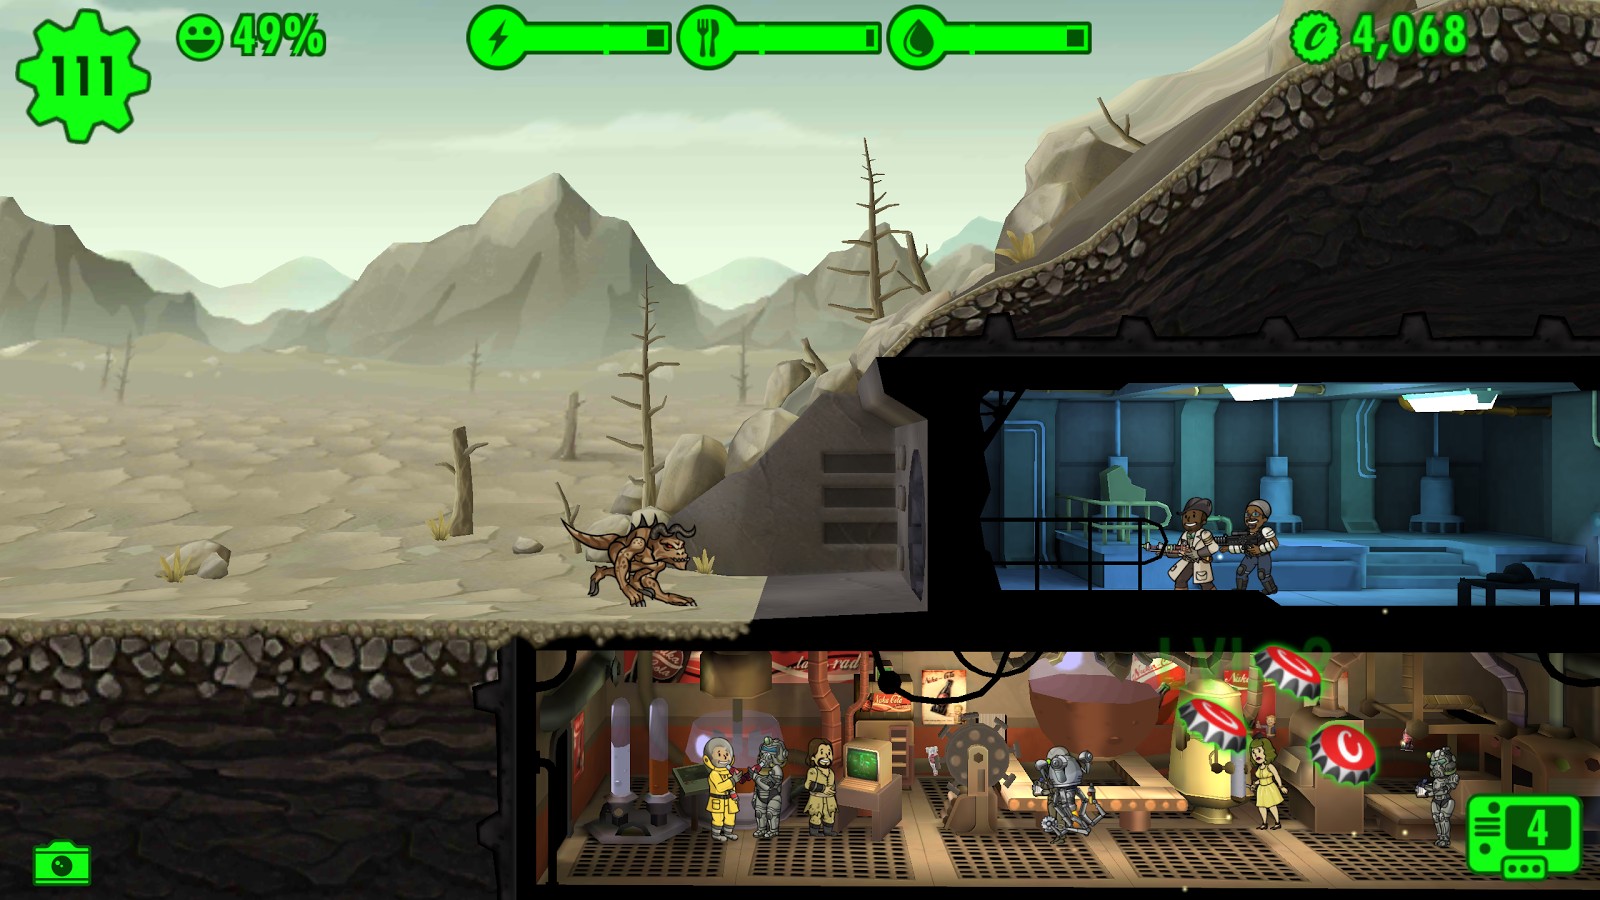 fallout shelter mods nude